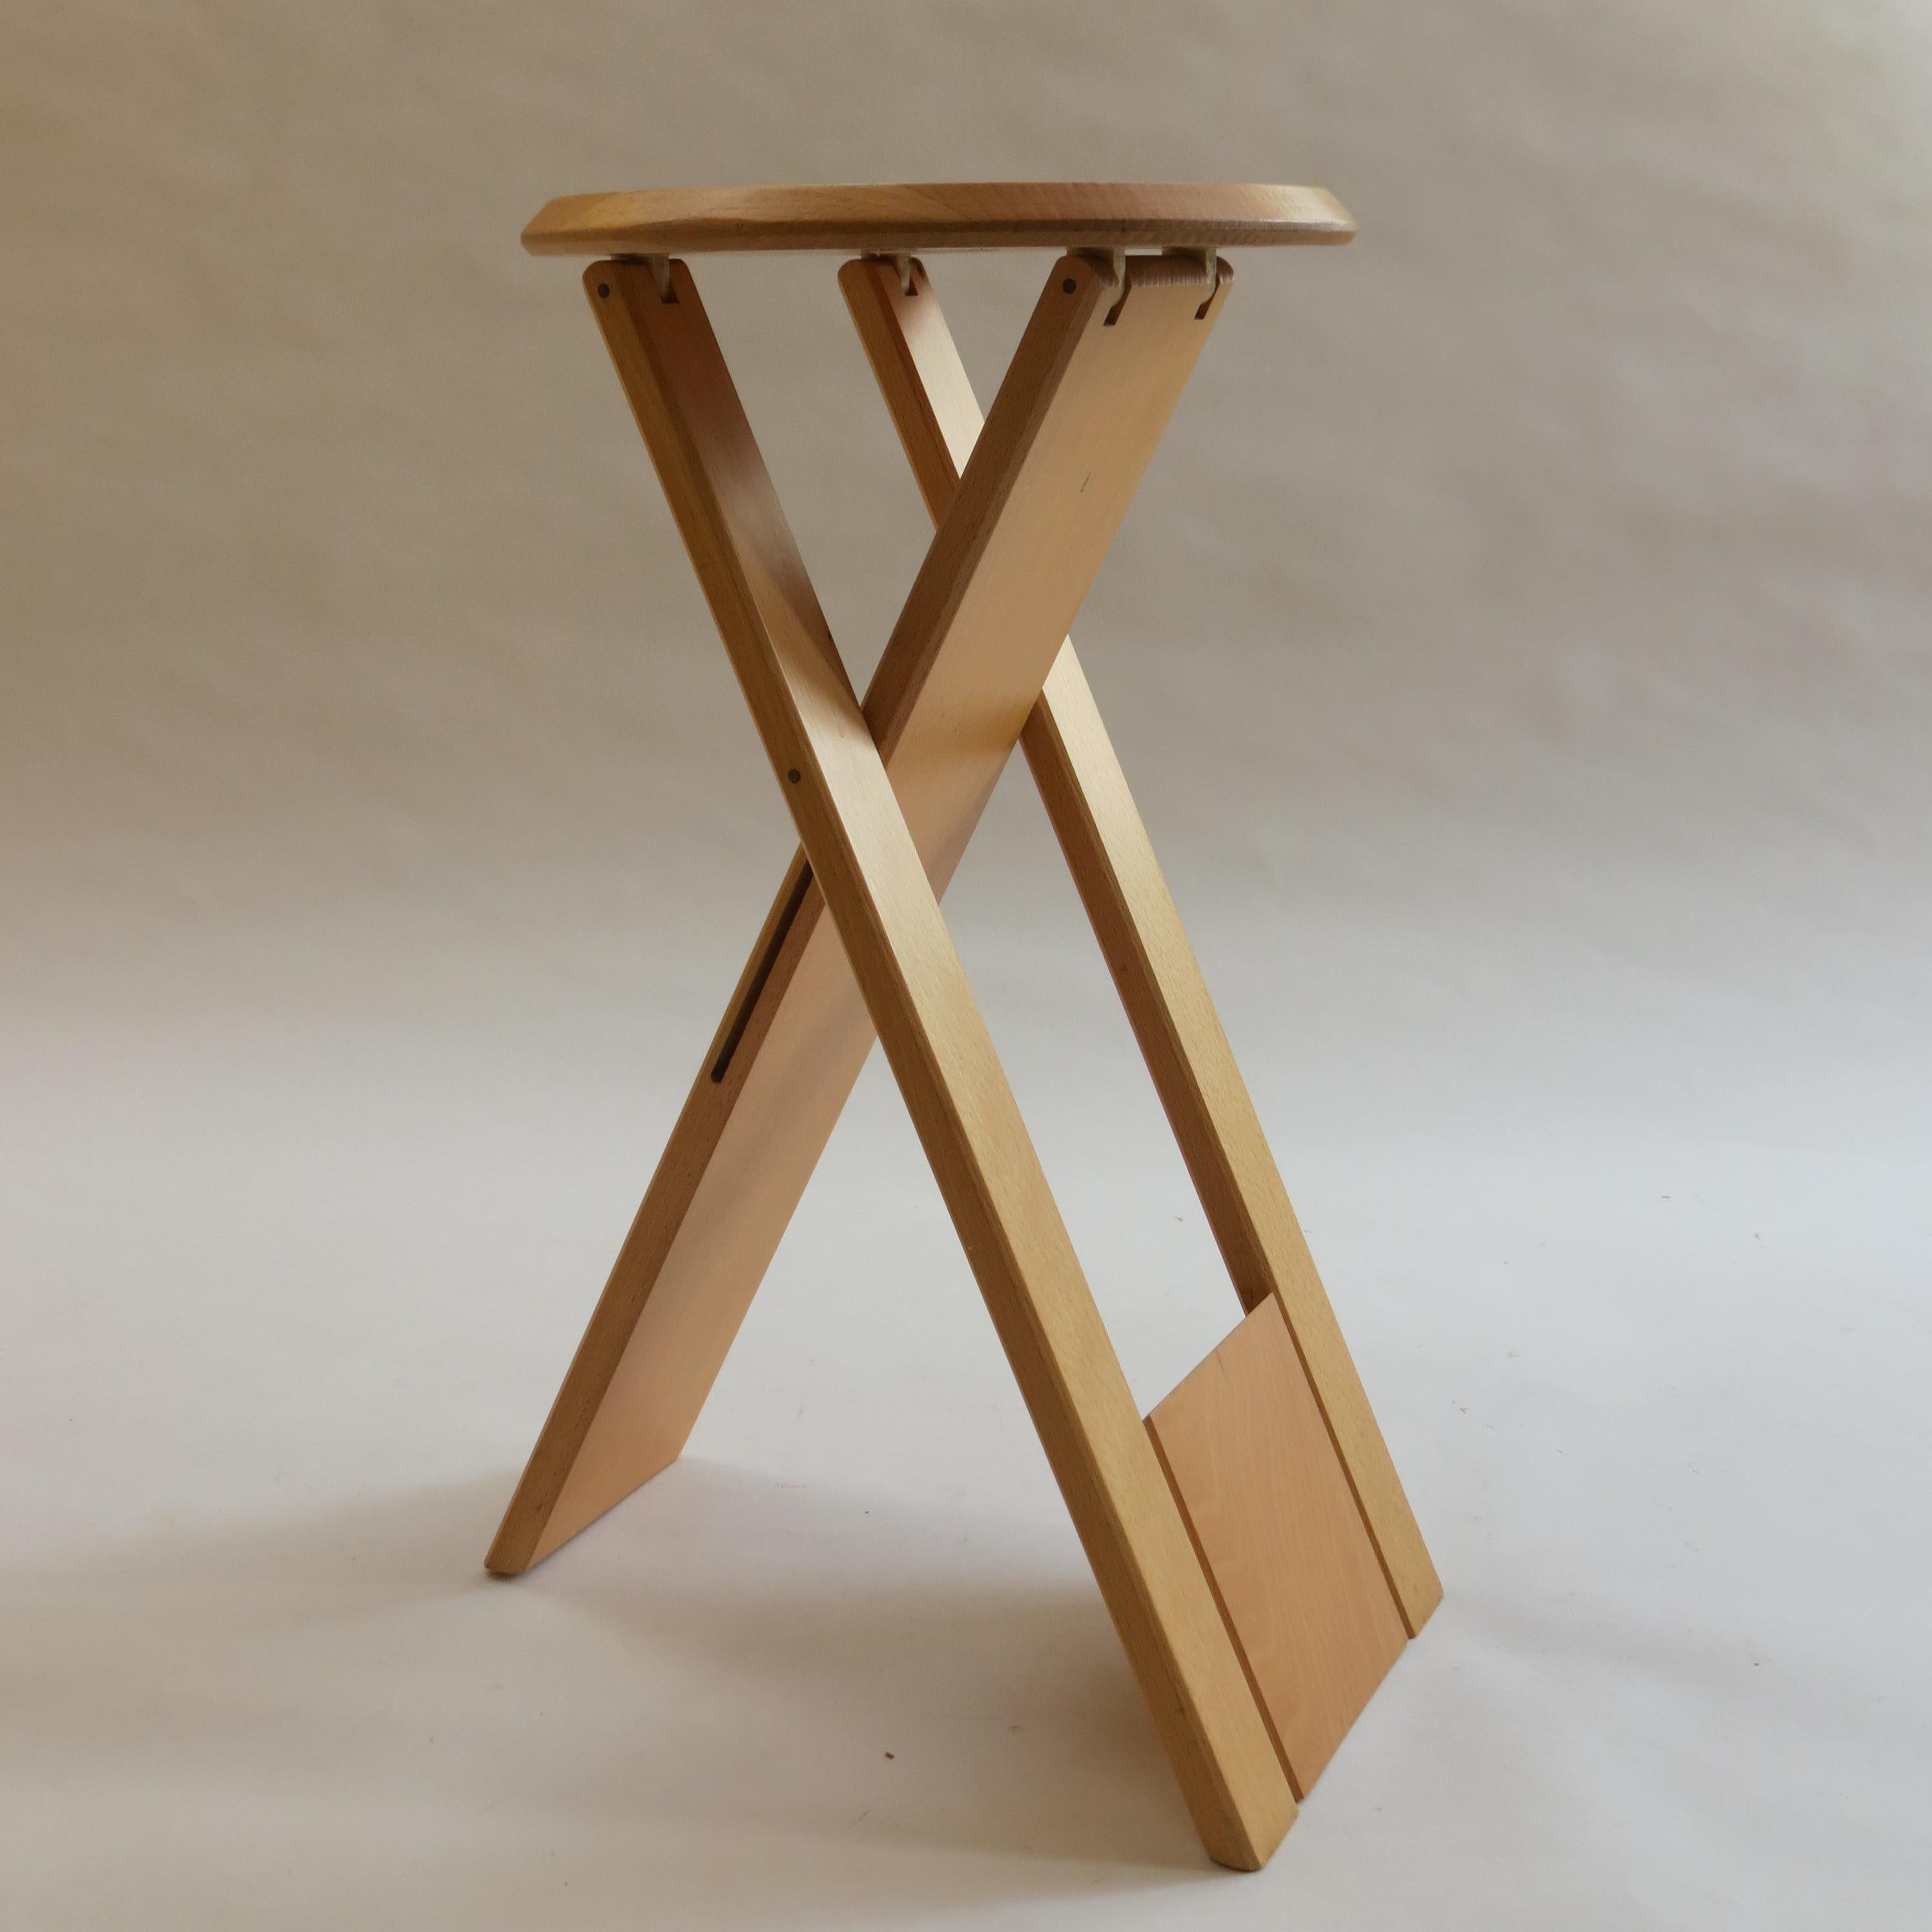 Suzy stool, designed by Adrian Reed 1984/85 and manufactured by Princes Design Works Ltd. Manufactured in the late 1980s. This stool was available in two sizes, this is the taller version. 
Made from solid Beech with plastic/rubber hinges. The